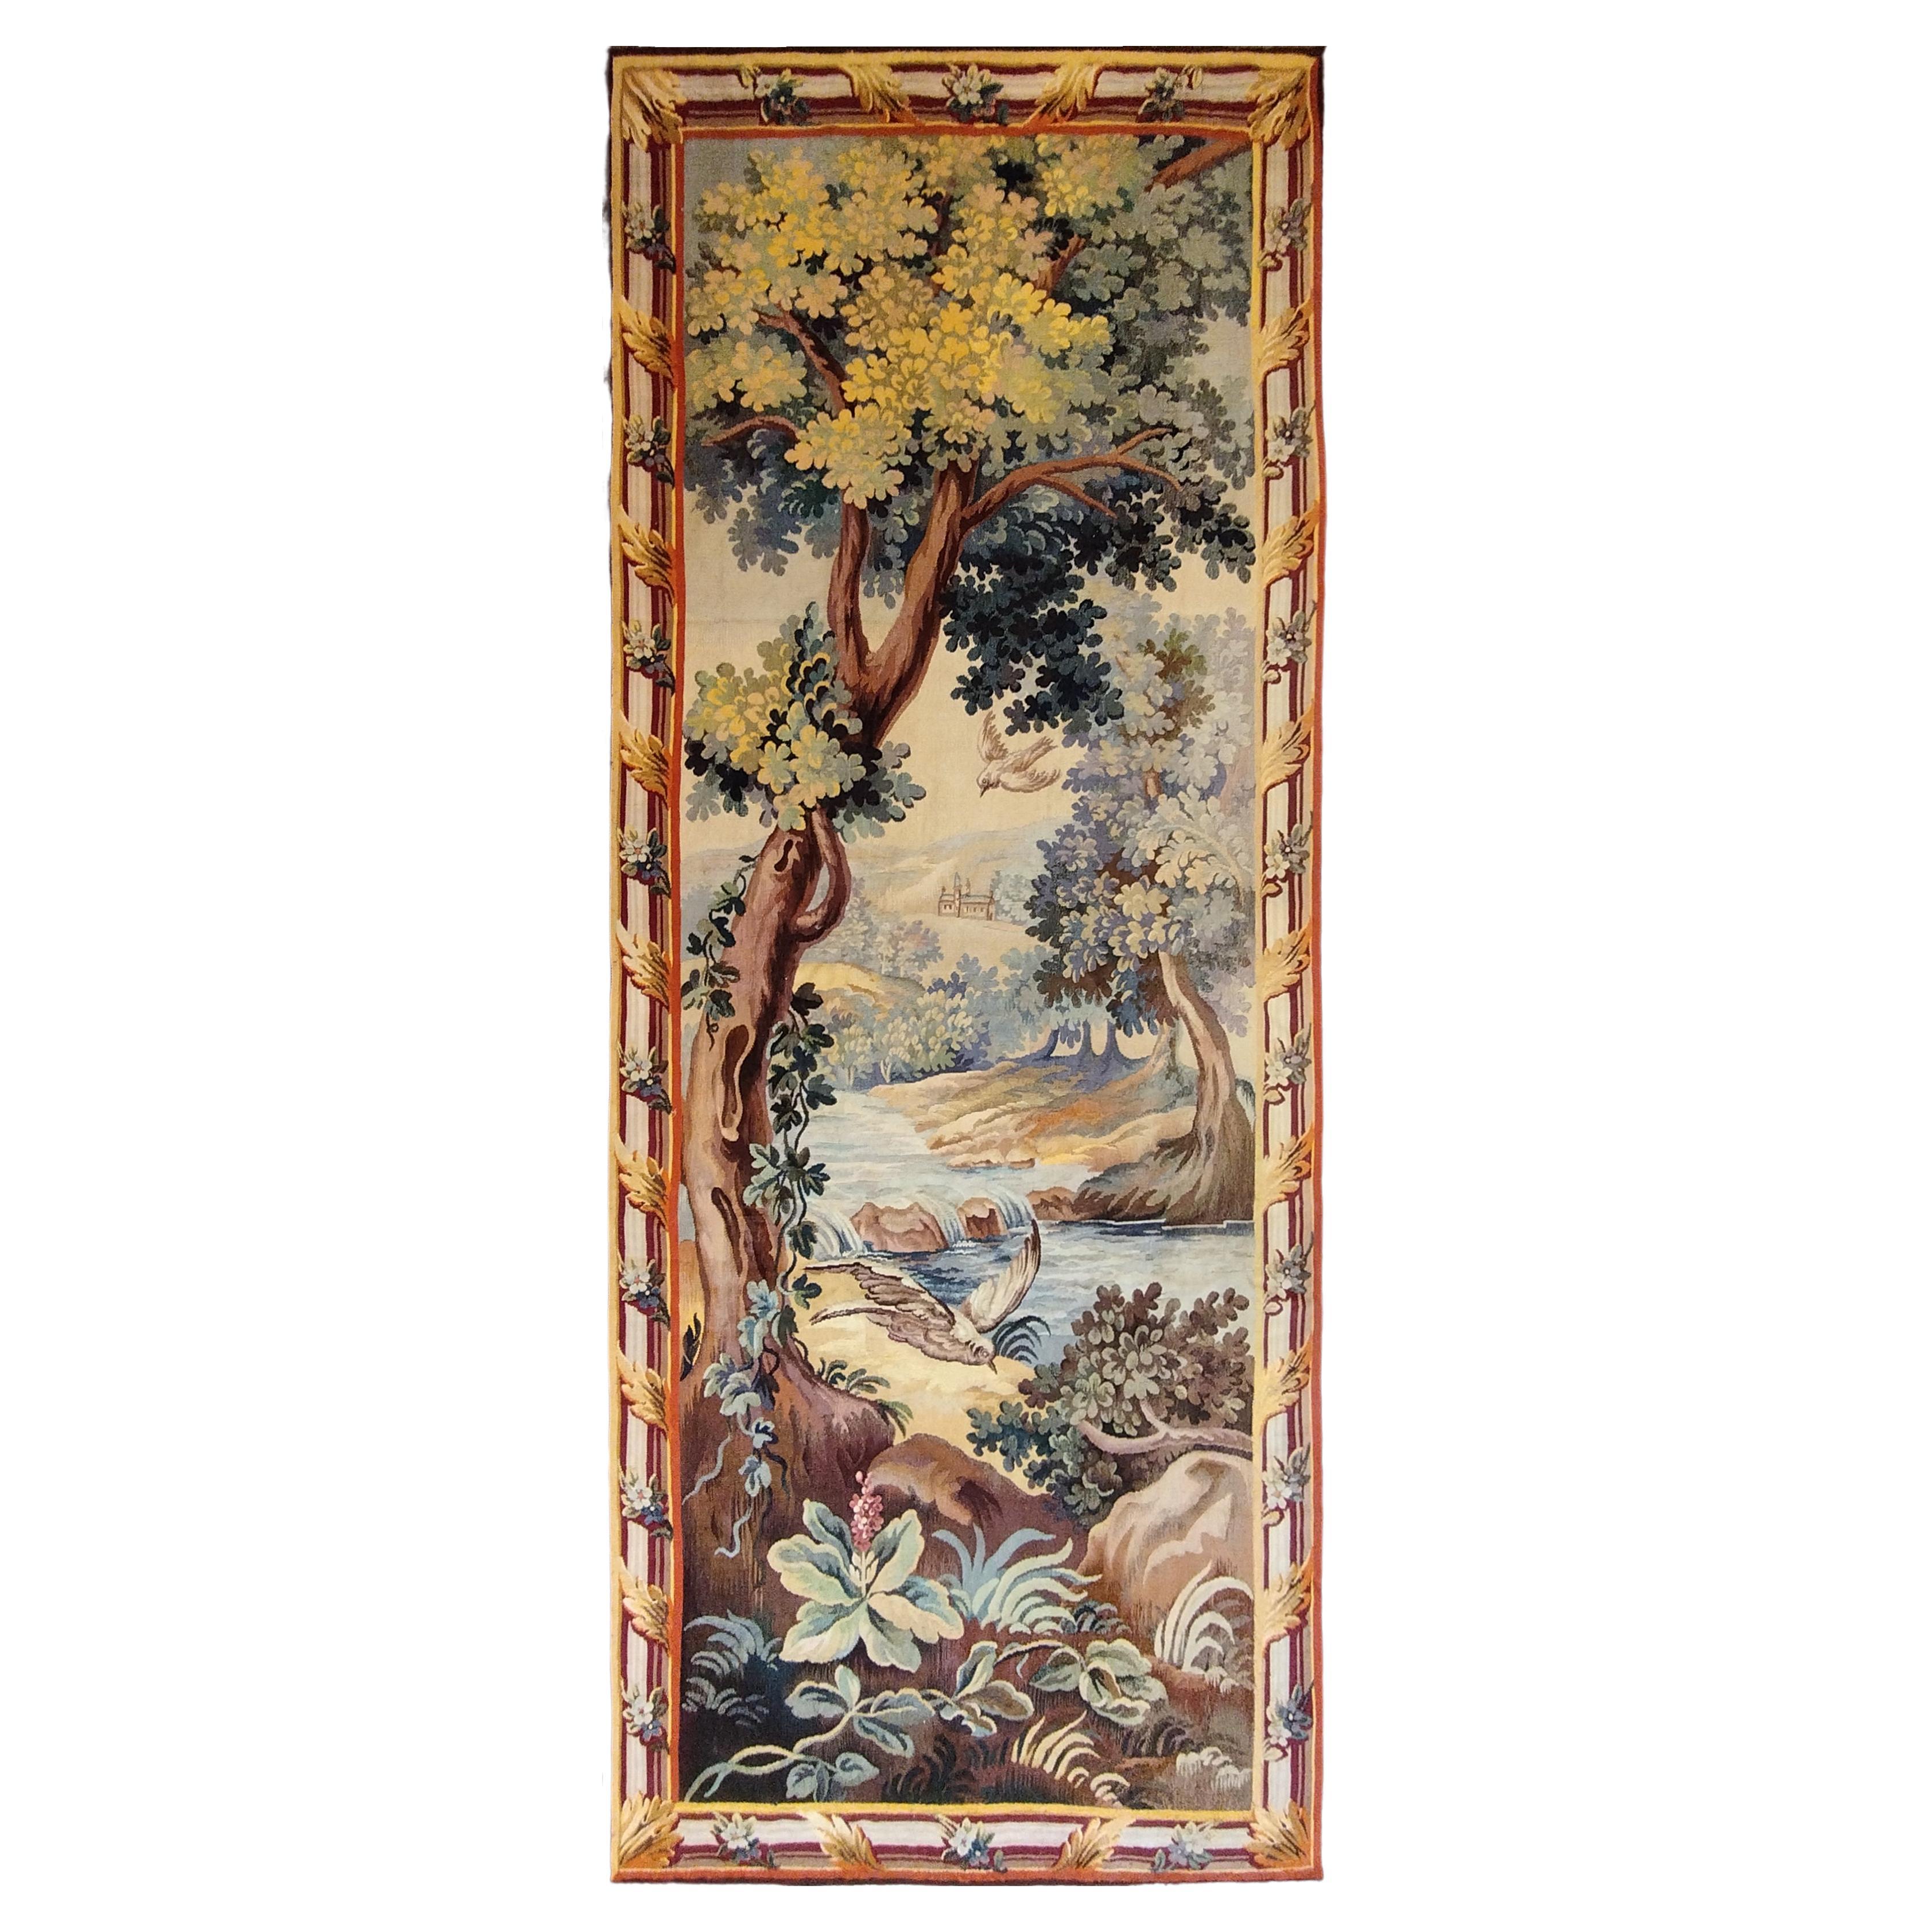  19th Century Aubusson Tapestry - N° 949